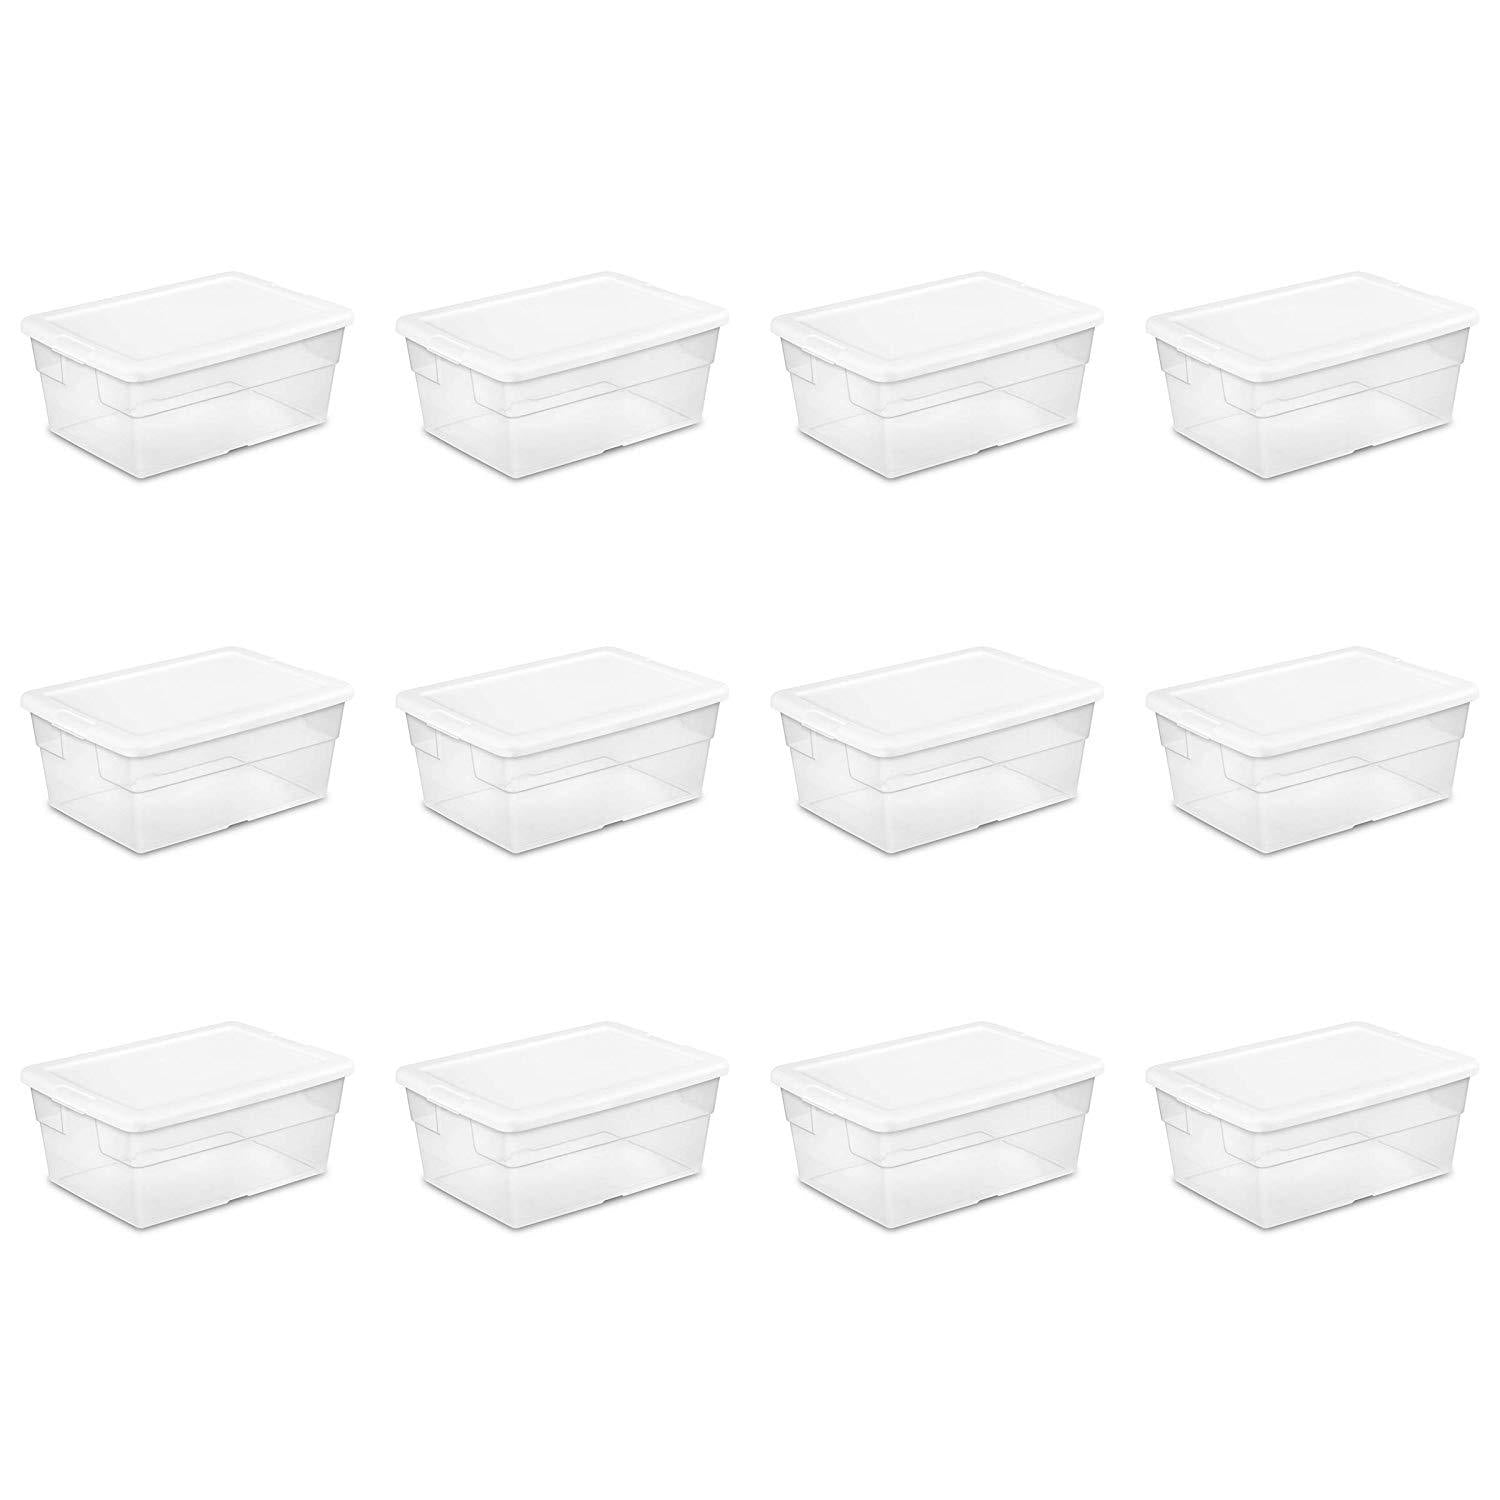 Sterilite - 16 Quart Clear Plastic Stacking Storage Drawer Container Box (12 Pack)